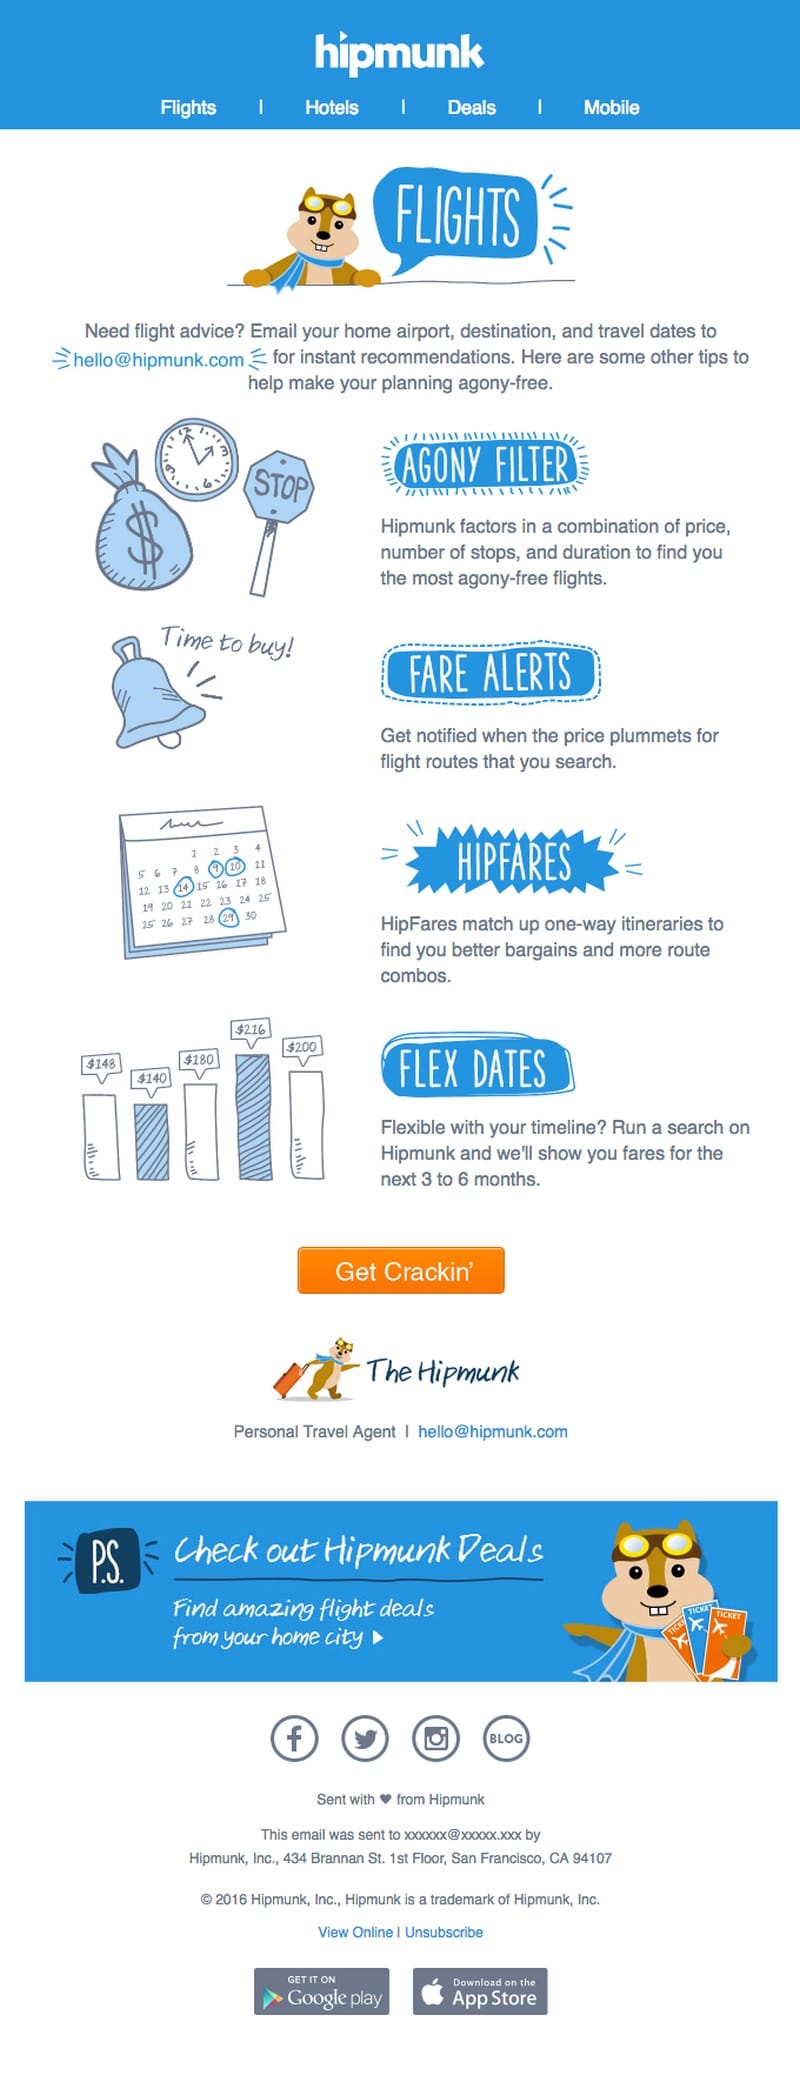 Hipmunk email showing an example of a lead magnet